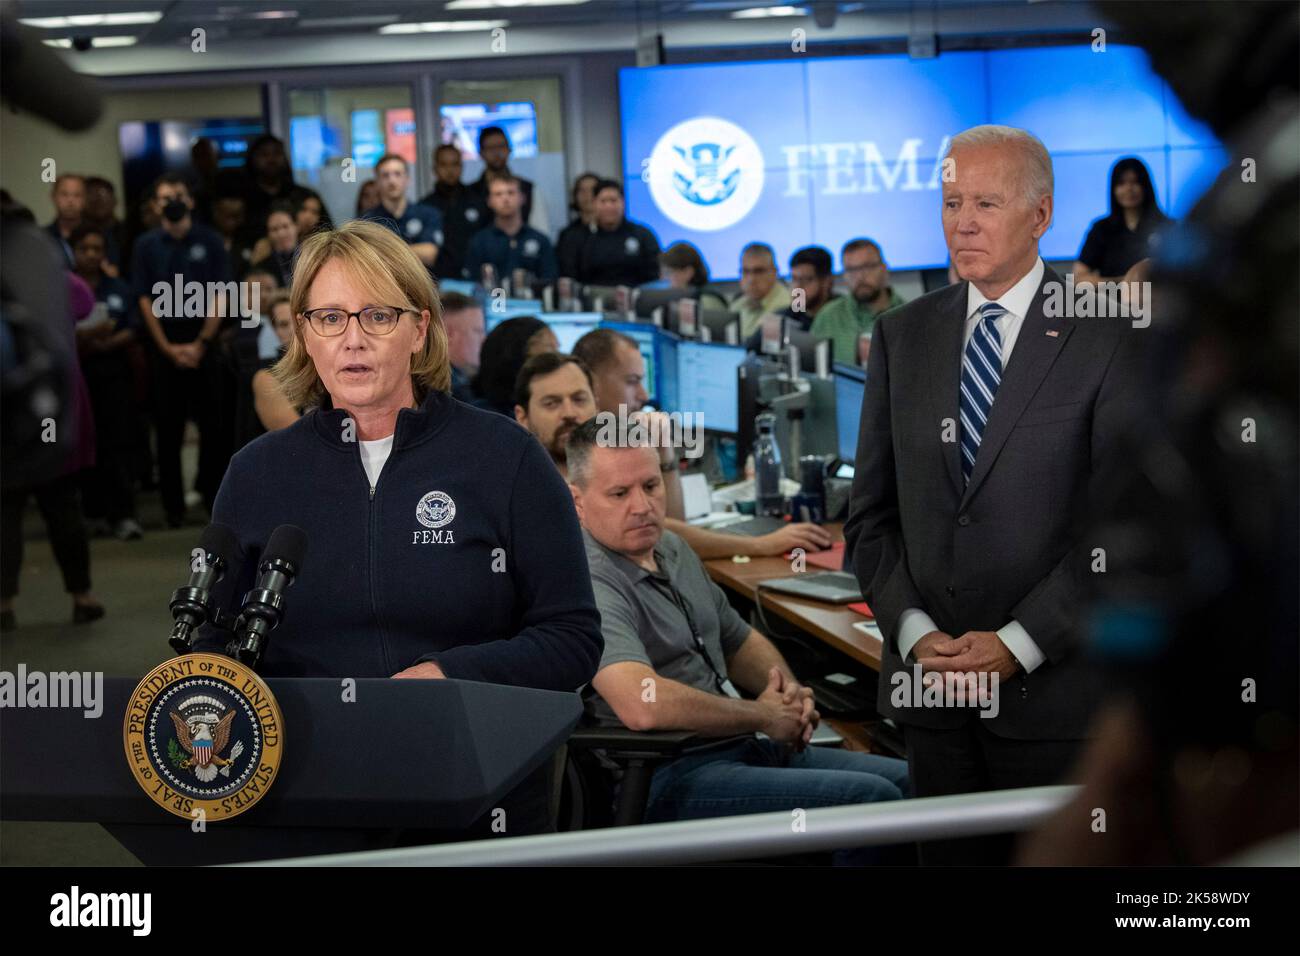 Washington, United States. 29 September, 2022. U.S. FEMA Administrator Deanne Criswell, left, delivers remarks during a briefing on Hurricane Ian as President Joe Biden, right, looks on at the Emergency Response Center inside FEMA headquarters, September 29, 2022, in Washington, D.C. Credit: Sydney Phoenix/Homeland Security/Alamy Live News Stock Photo